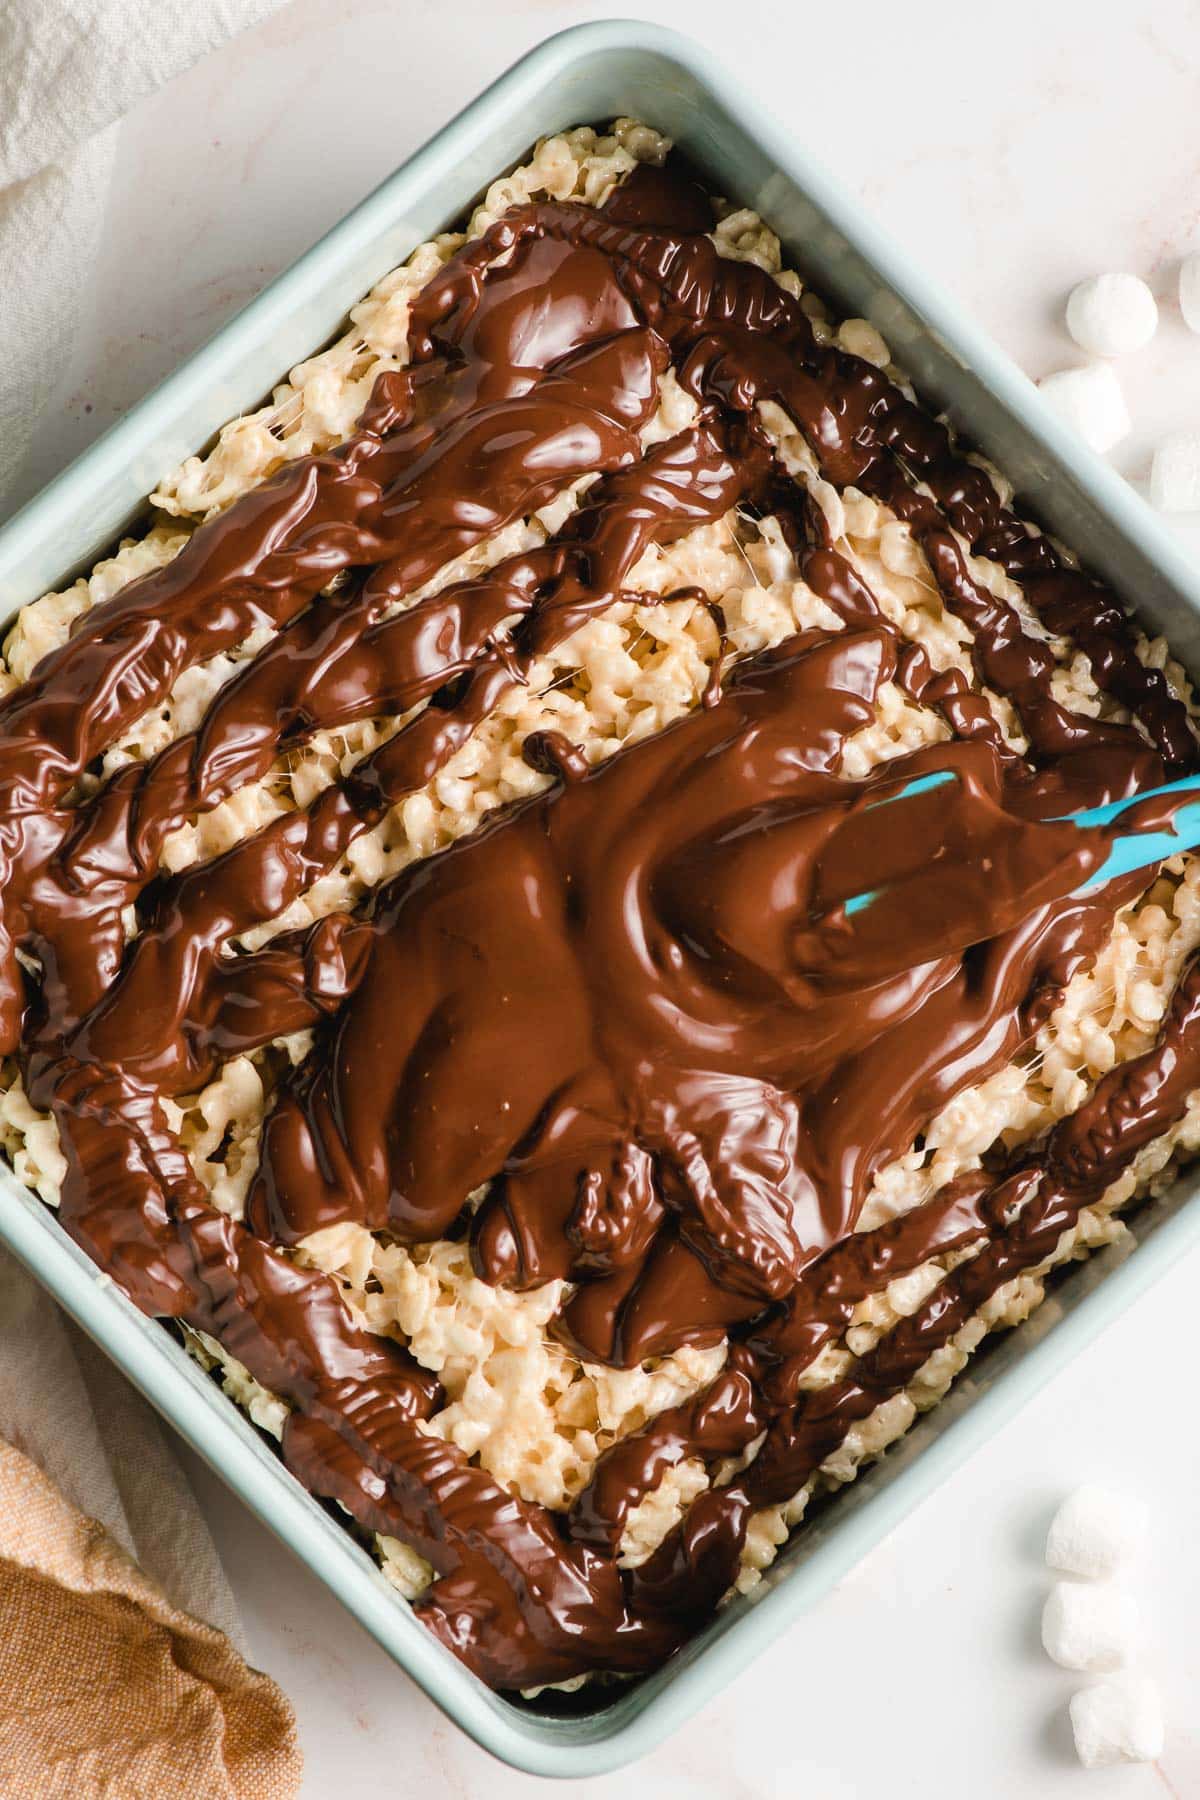 Melted chocolate being spread on a tray of rice krispie treats.